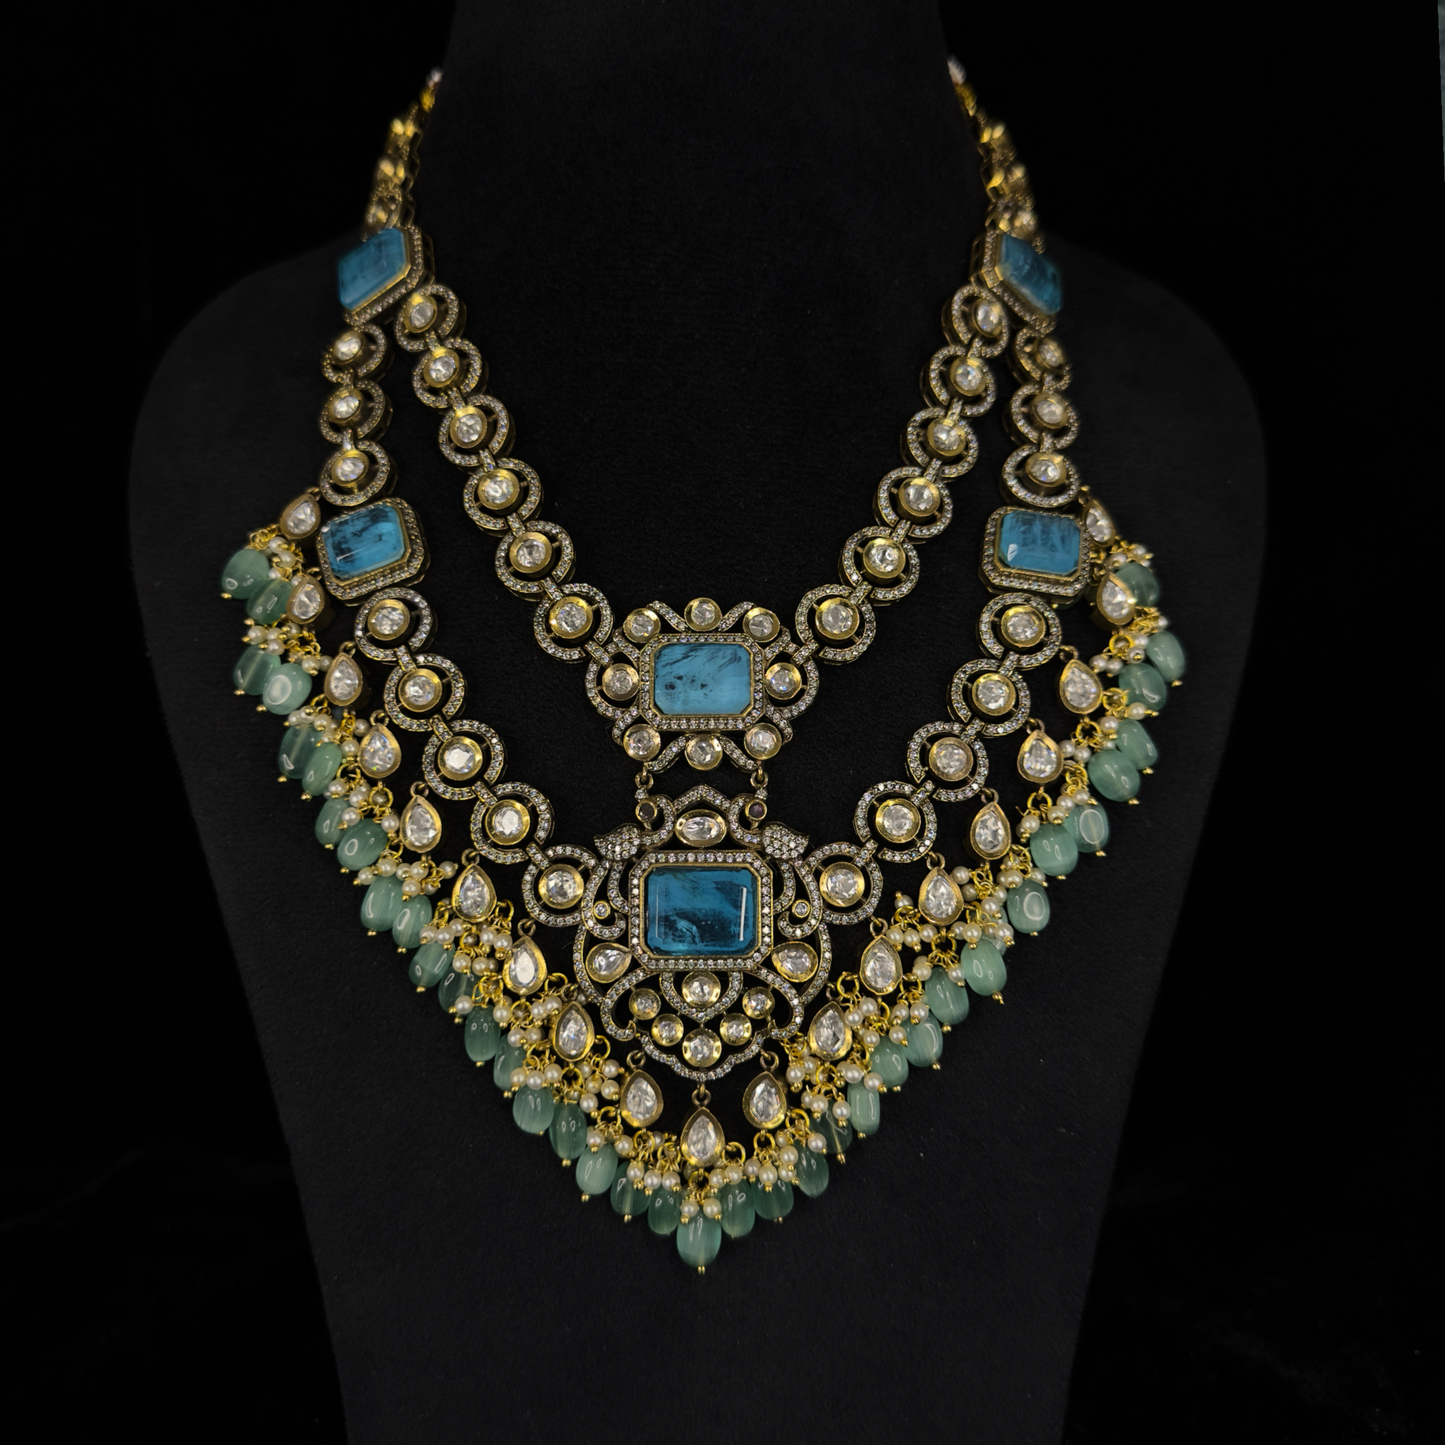 Two-Step Victorian Necklace Set with Aqua Blue Square-Cut Stones